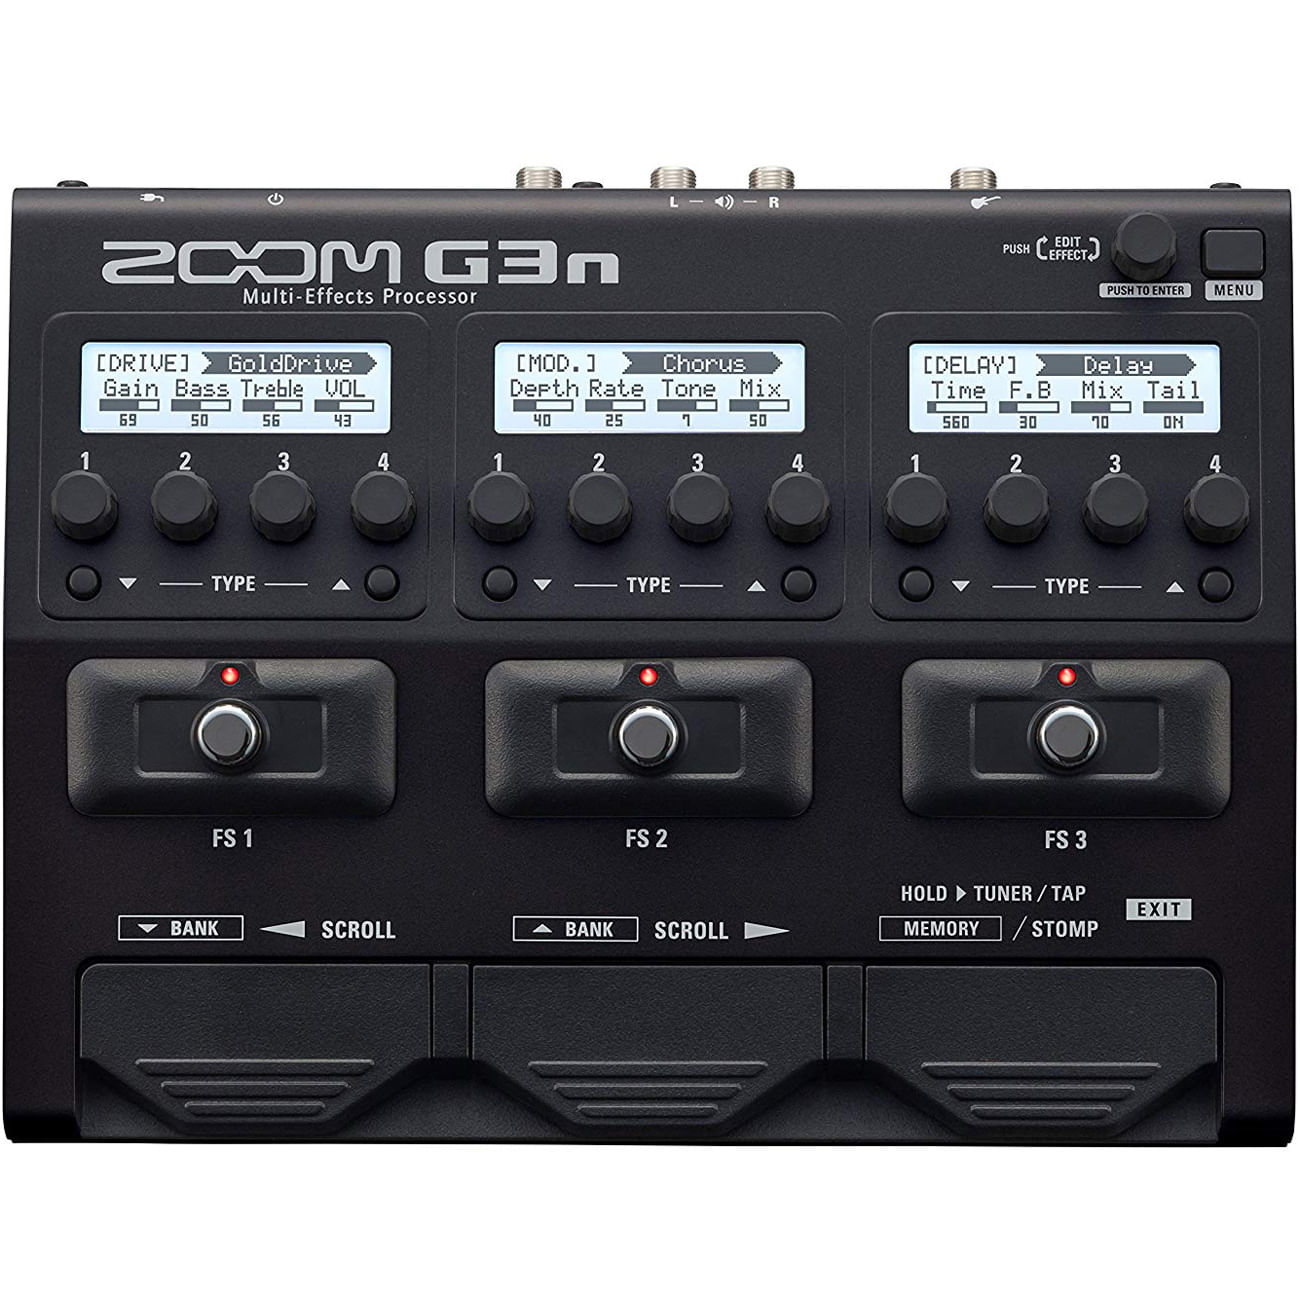 Zoom G3XN Multi-Effects Processor with Expression Pedal - Cosmo Music